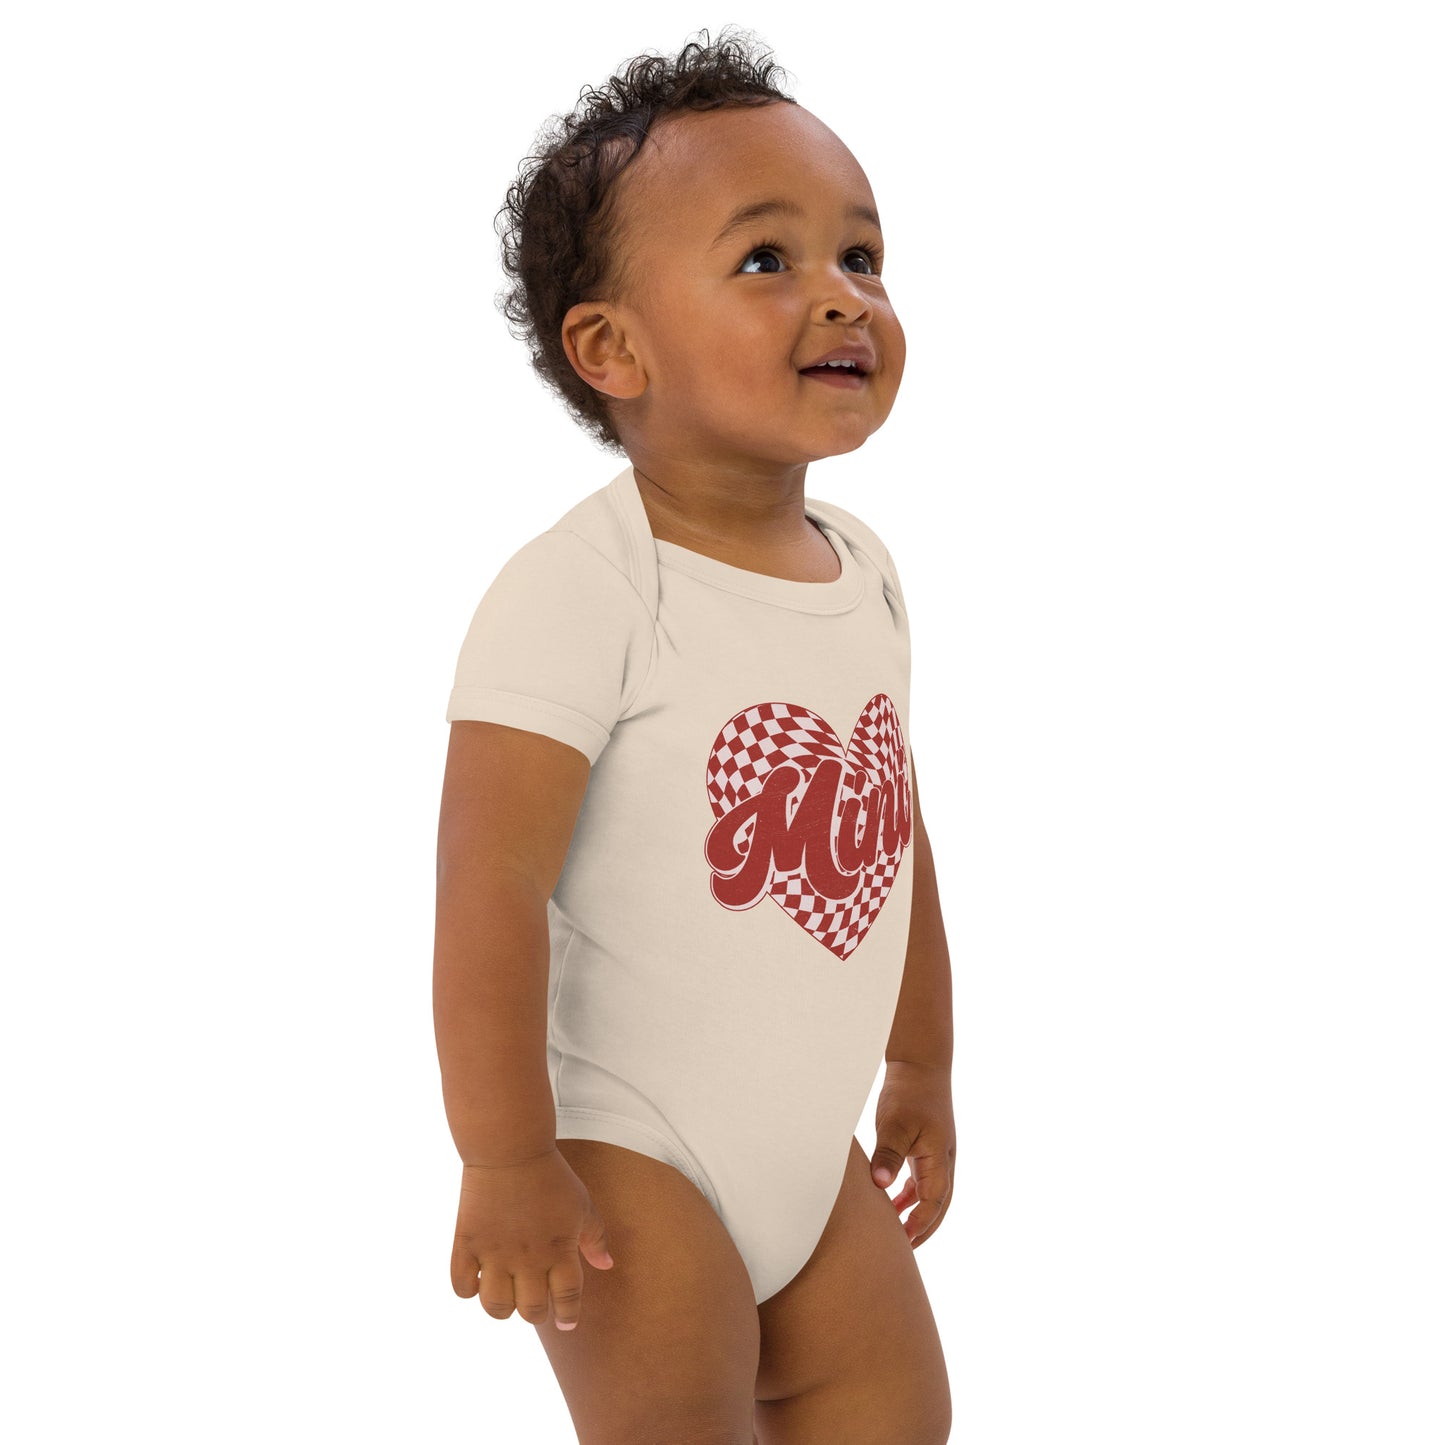 Checkered heart baby body suit